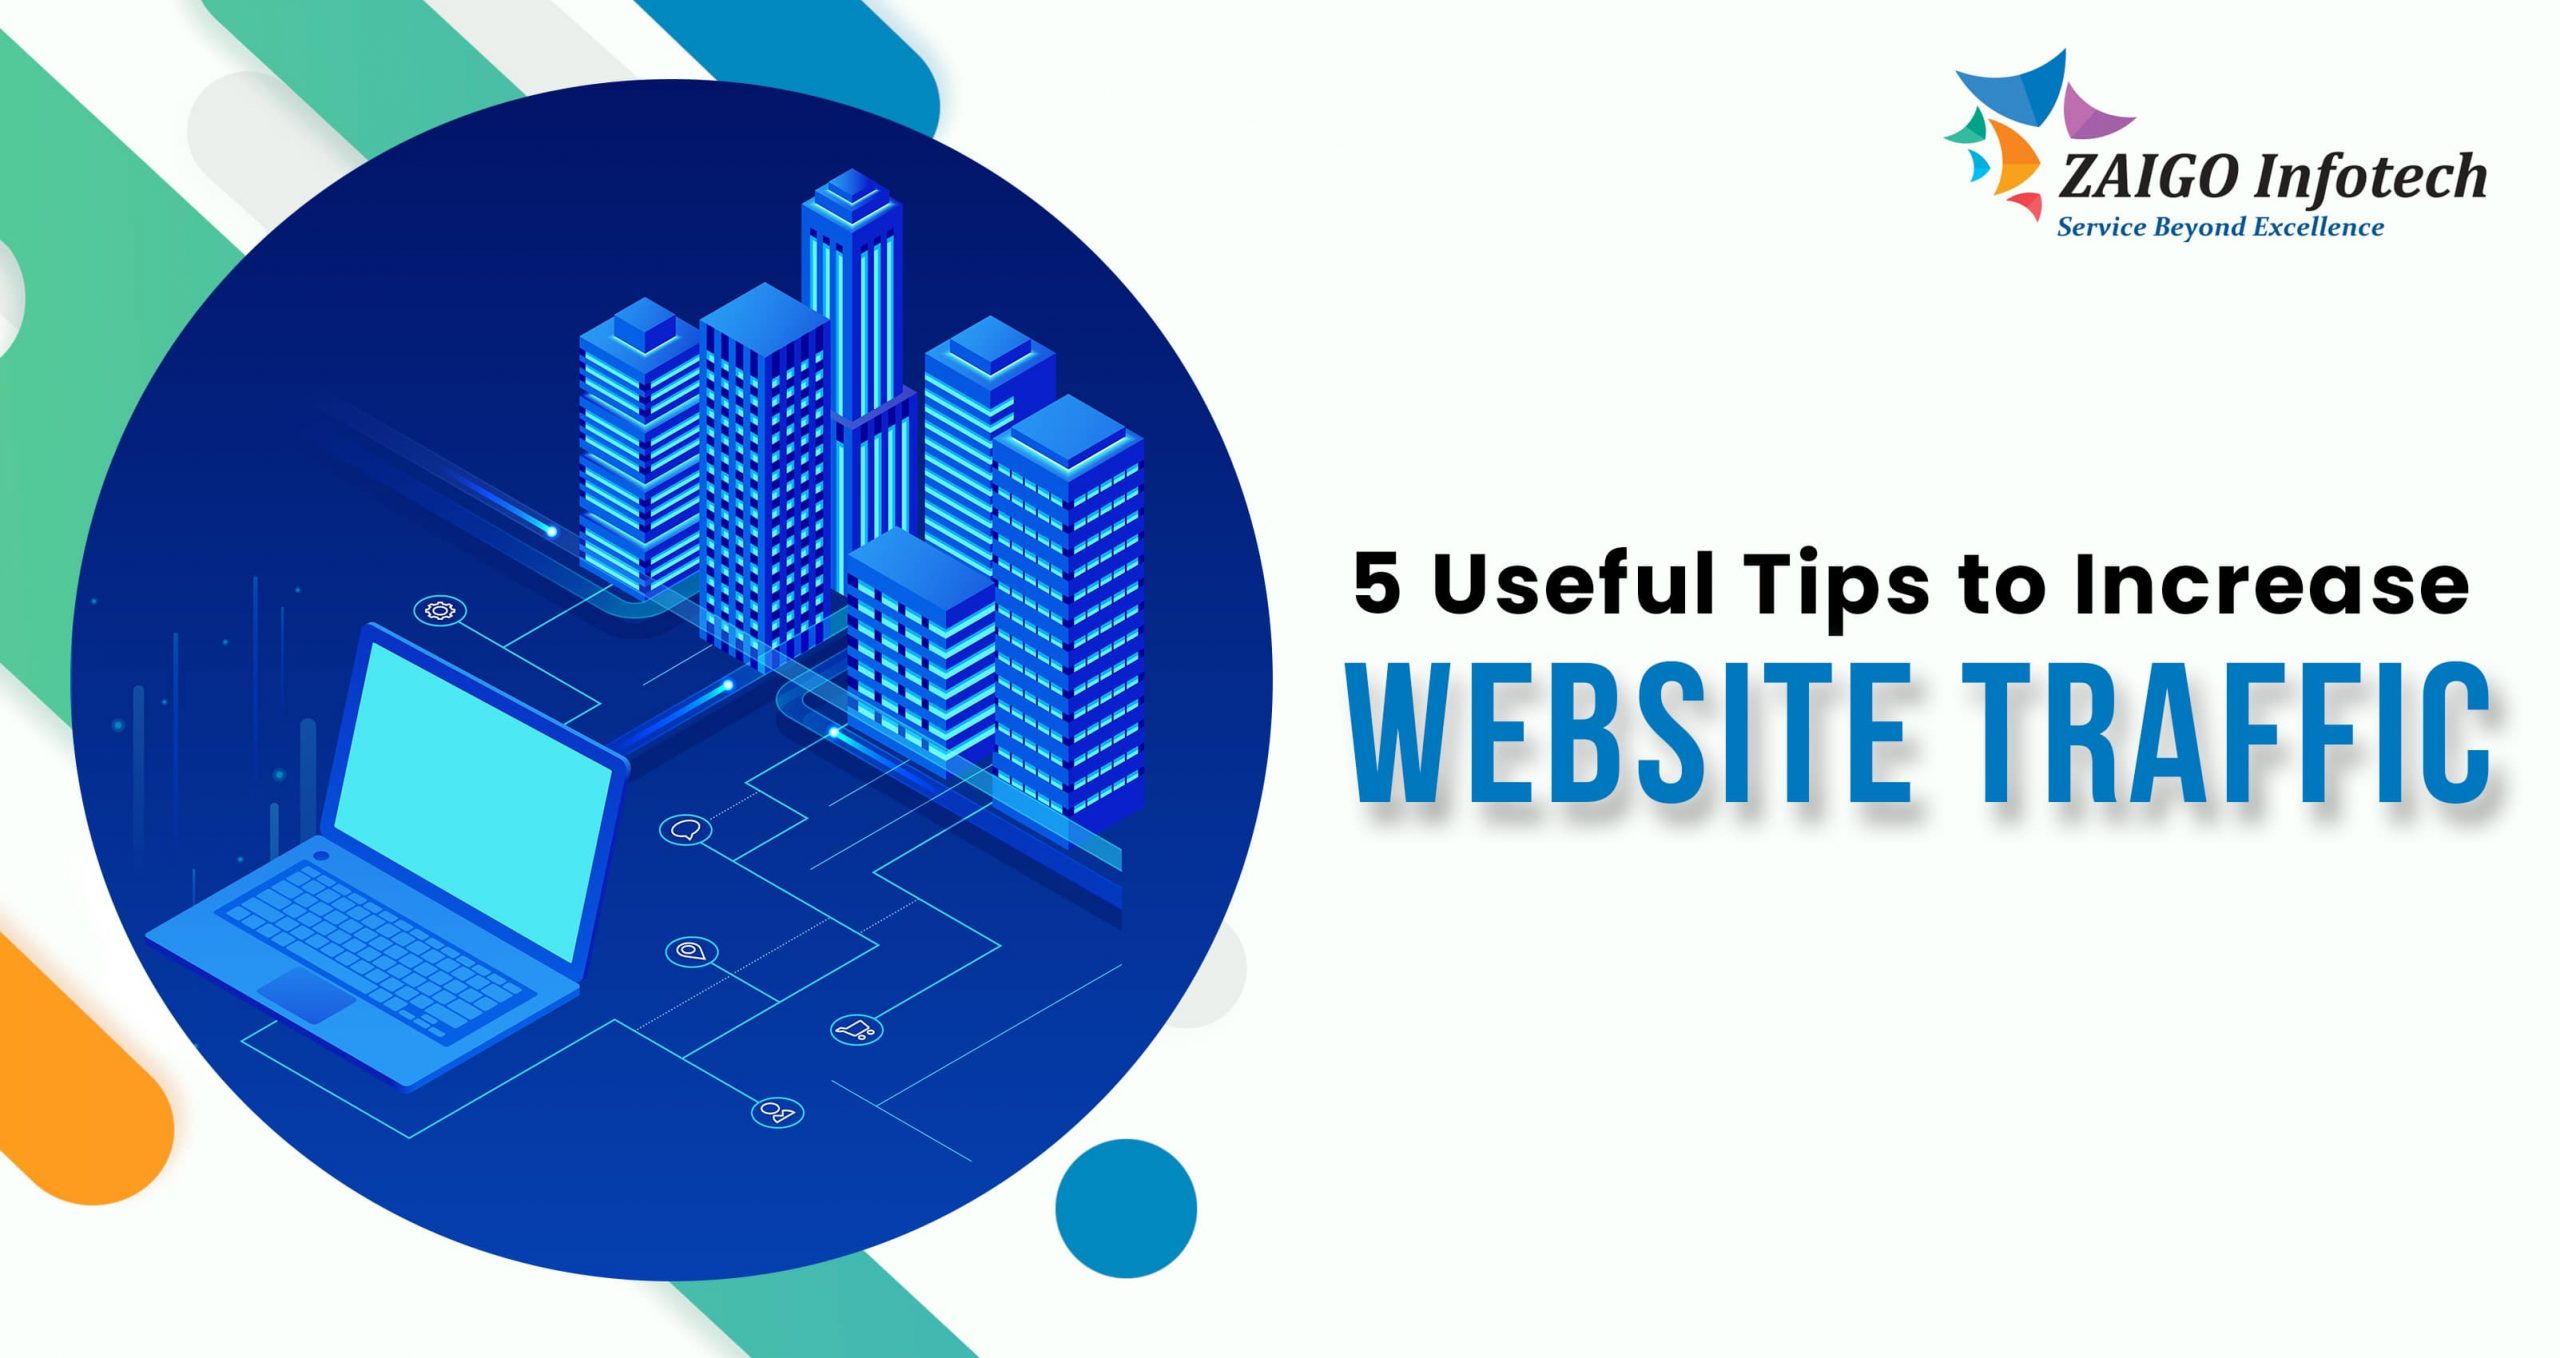 Top 5 Useful Tips to Increase Website Traffic